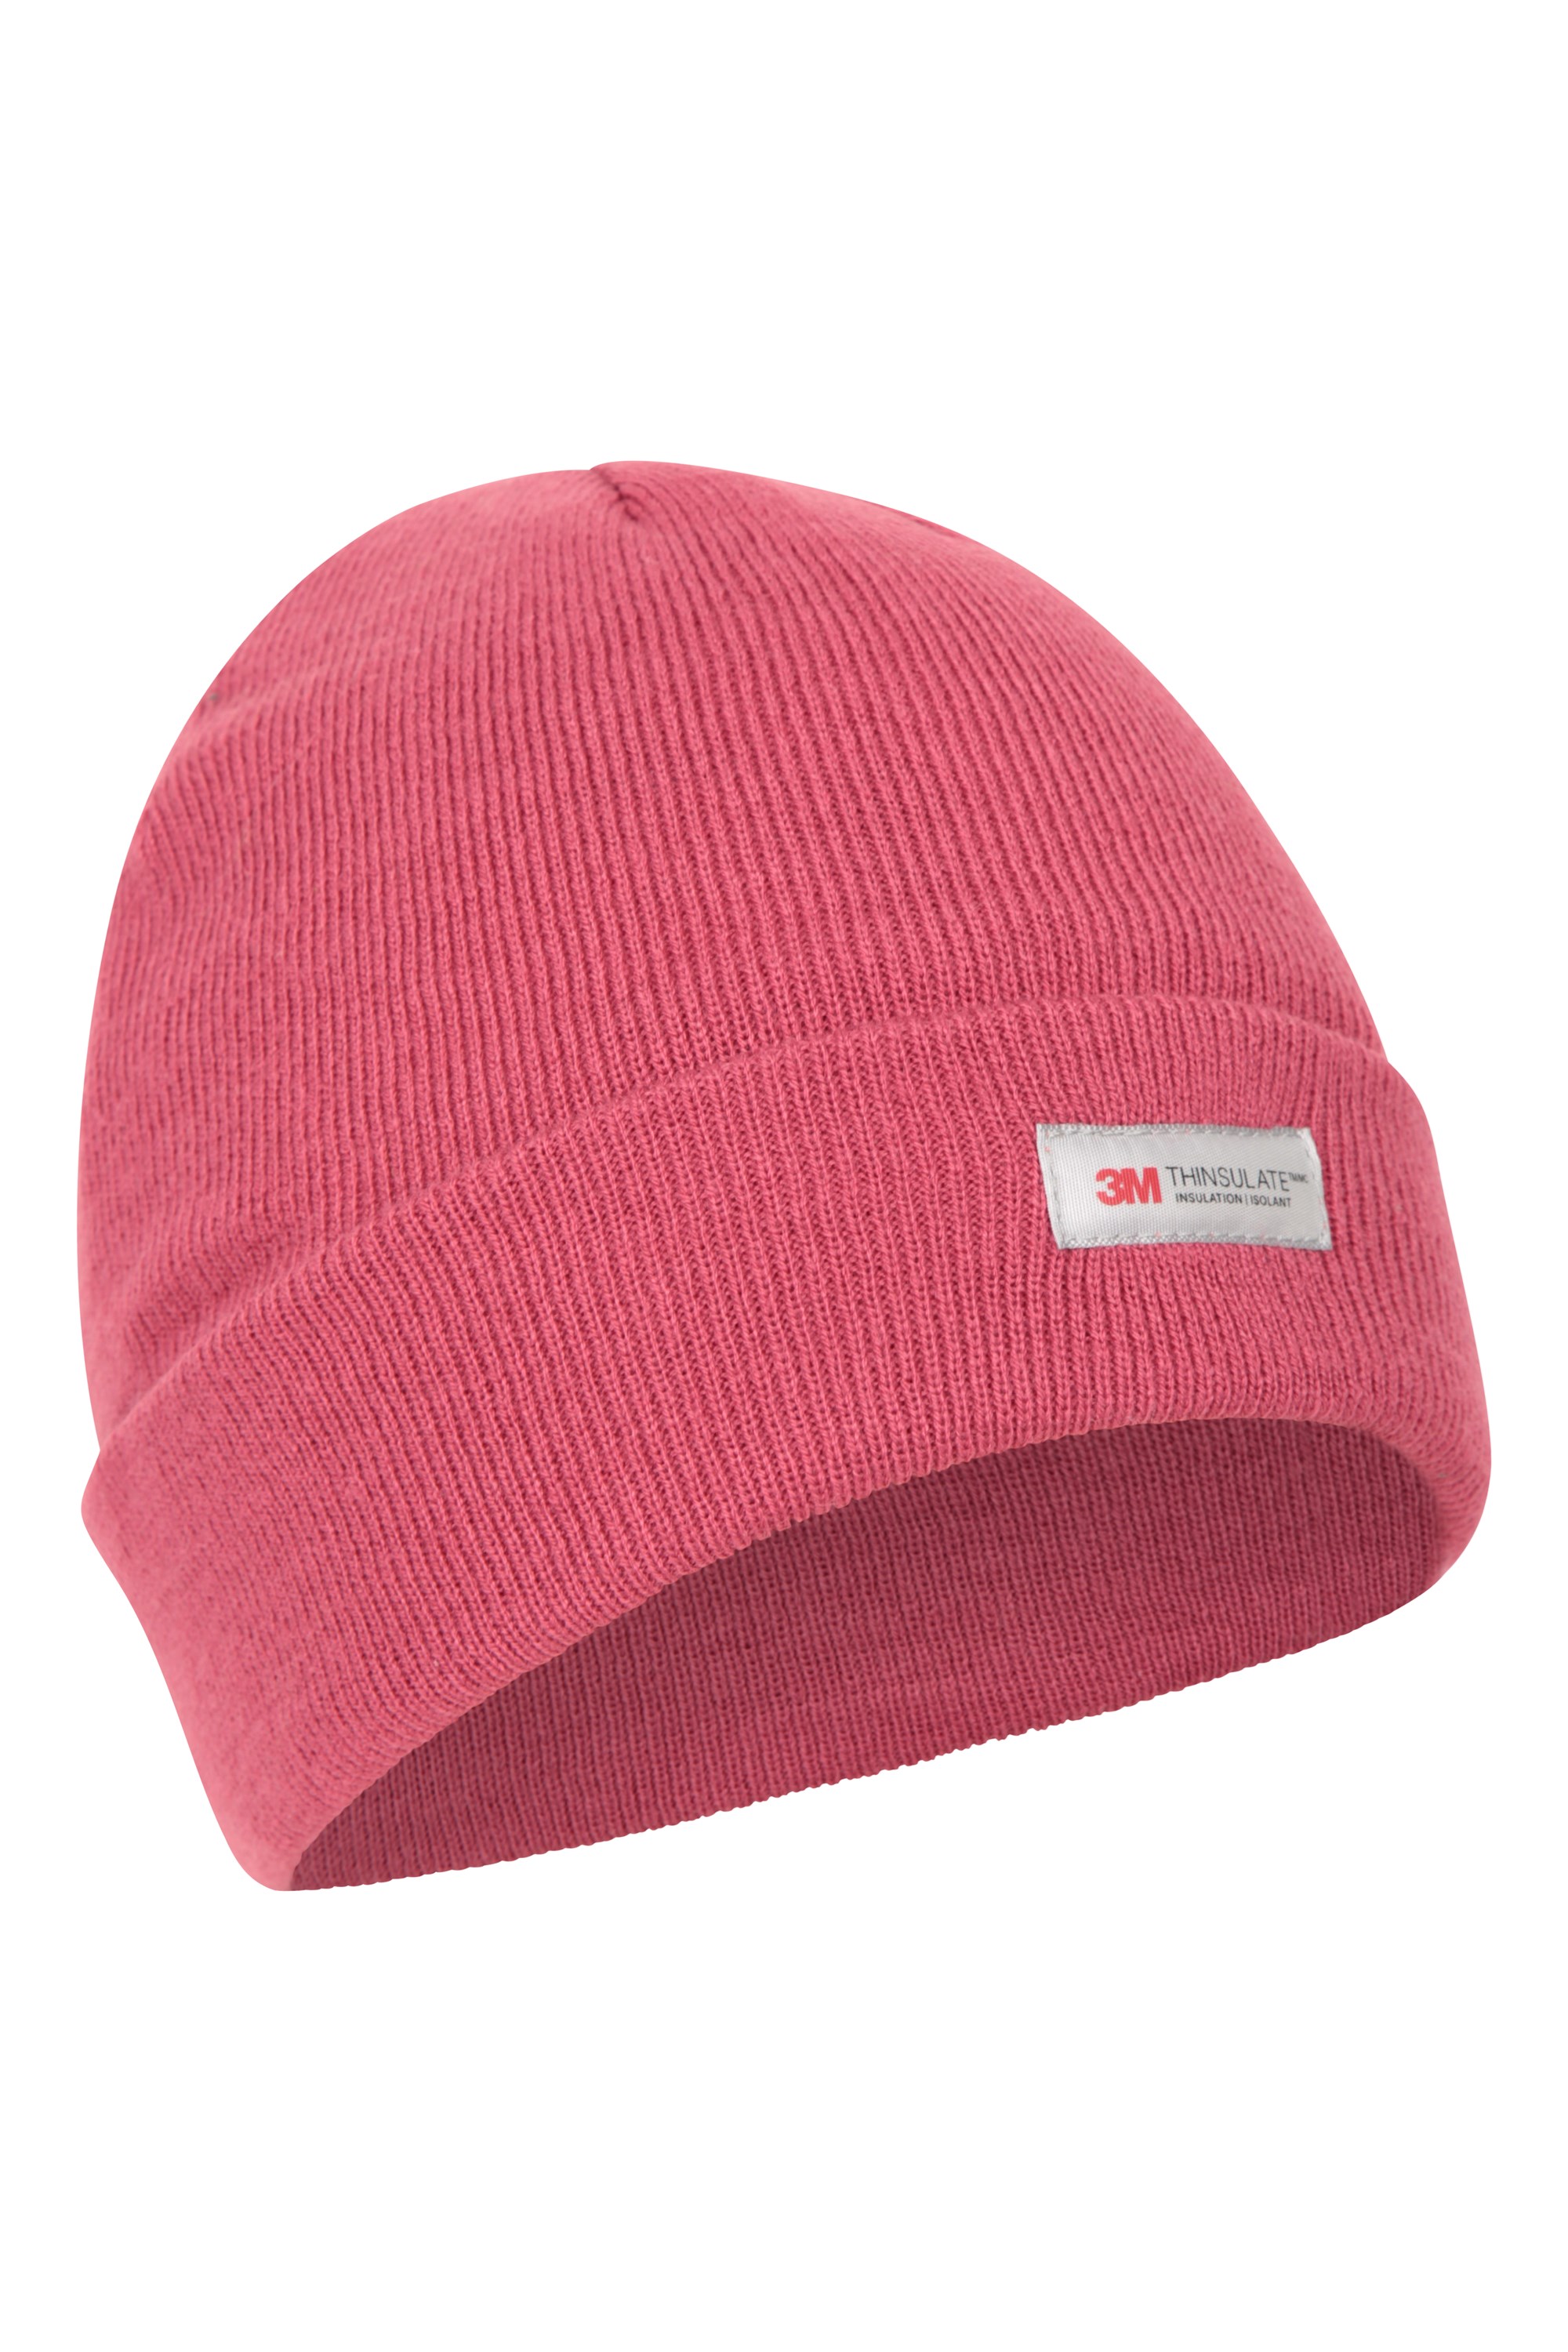 Kids Thinsulate Knitted Beanie - Pink